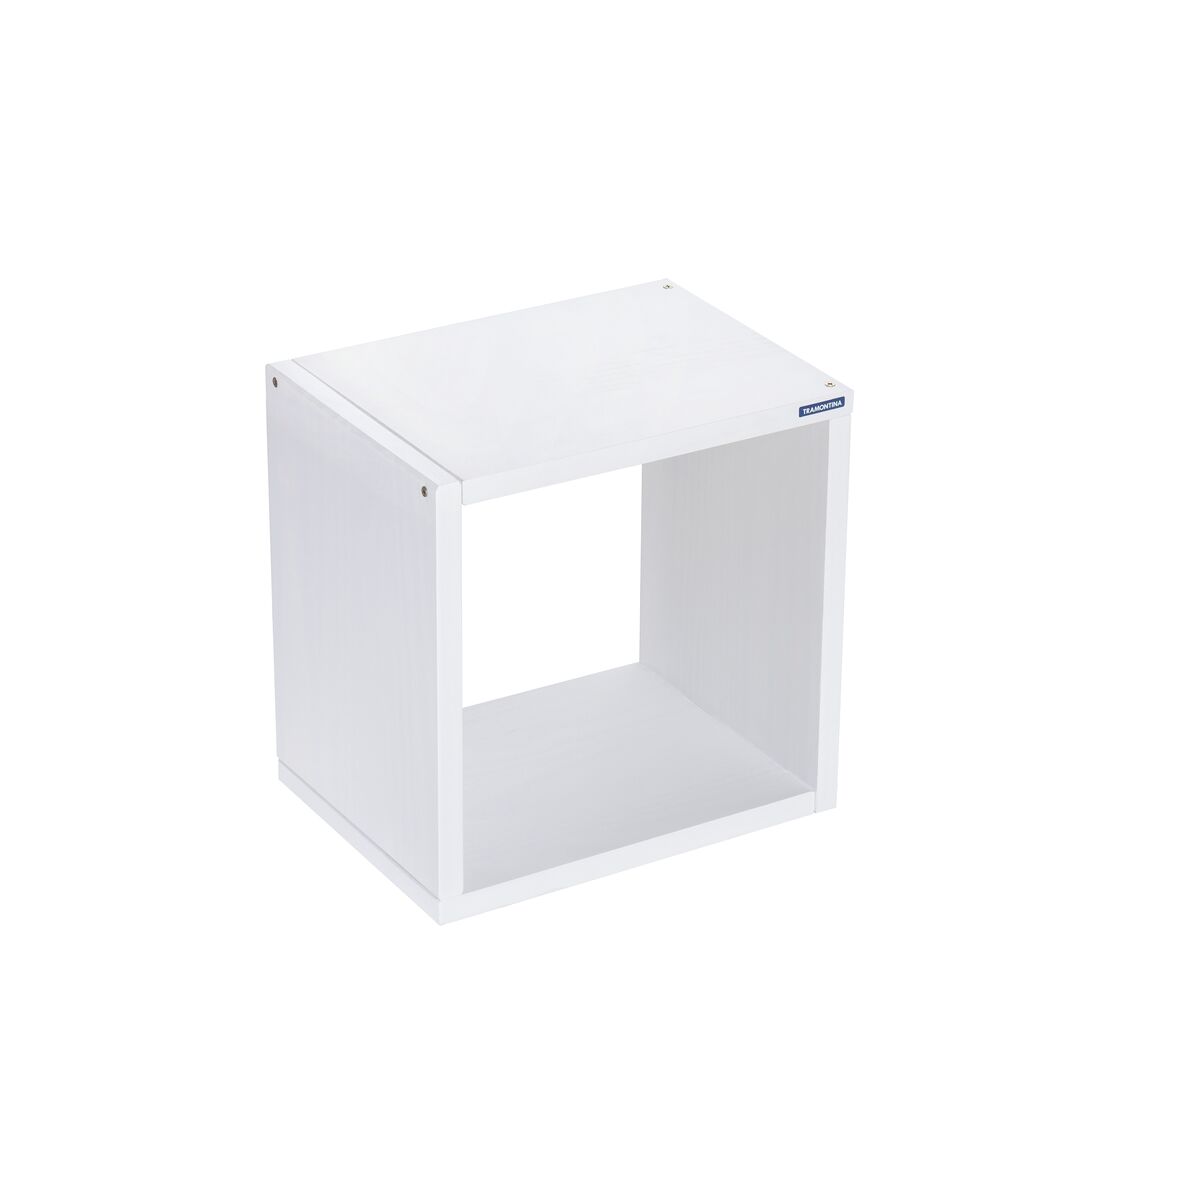 
258x220x258 mm Tramontina Cube in Pine Wood with White Finish
